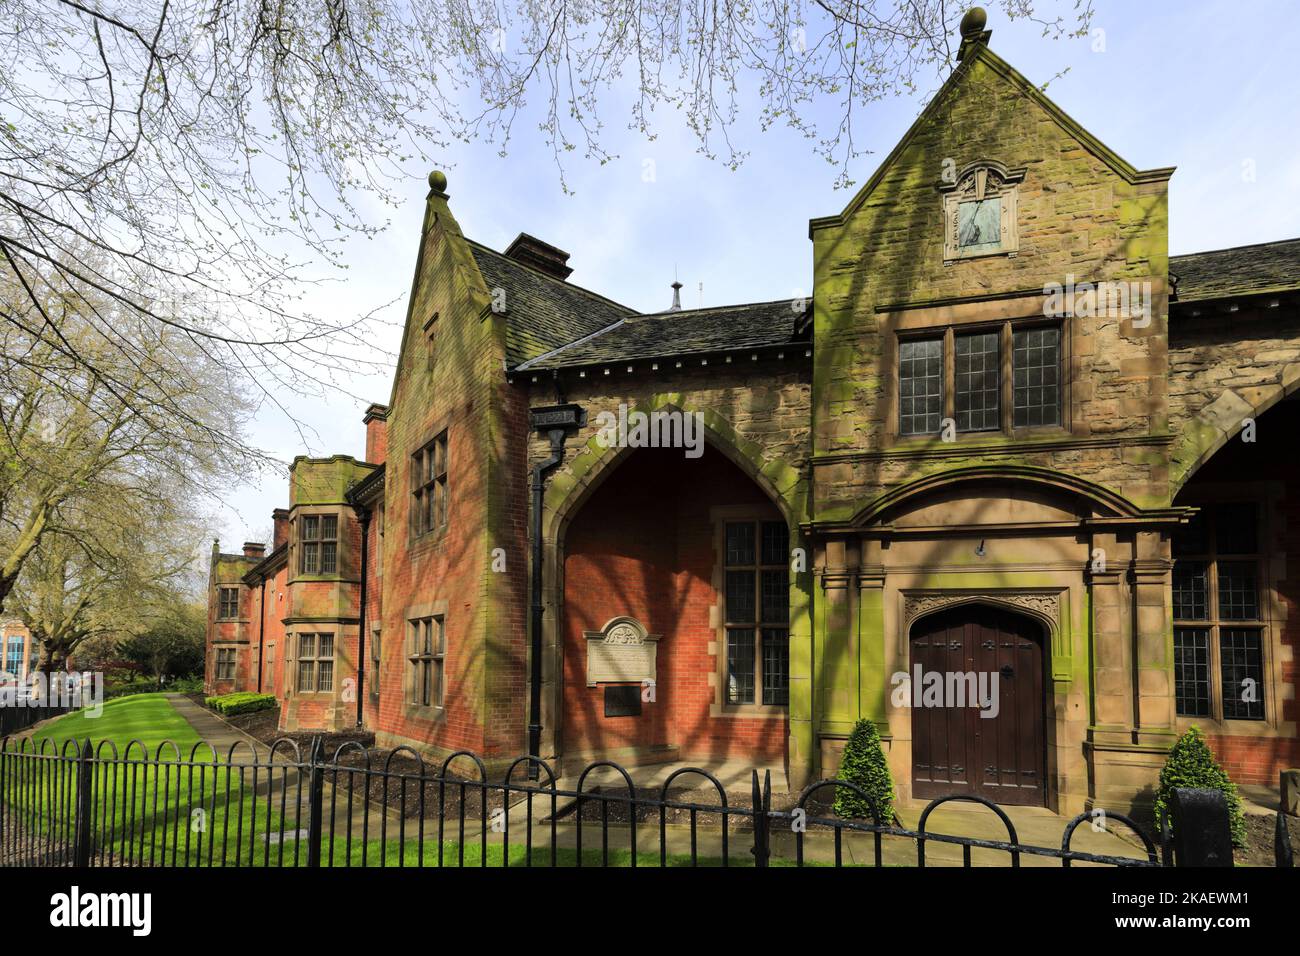 The old Trinity Hospital building, Leicester City; Leicestershire; England Stock Photo